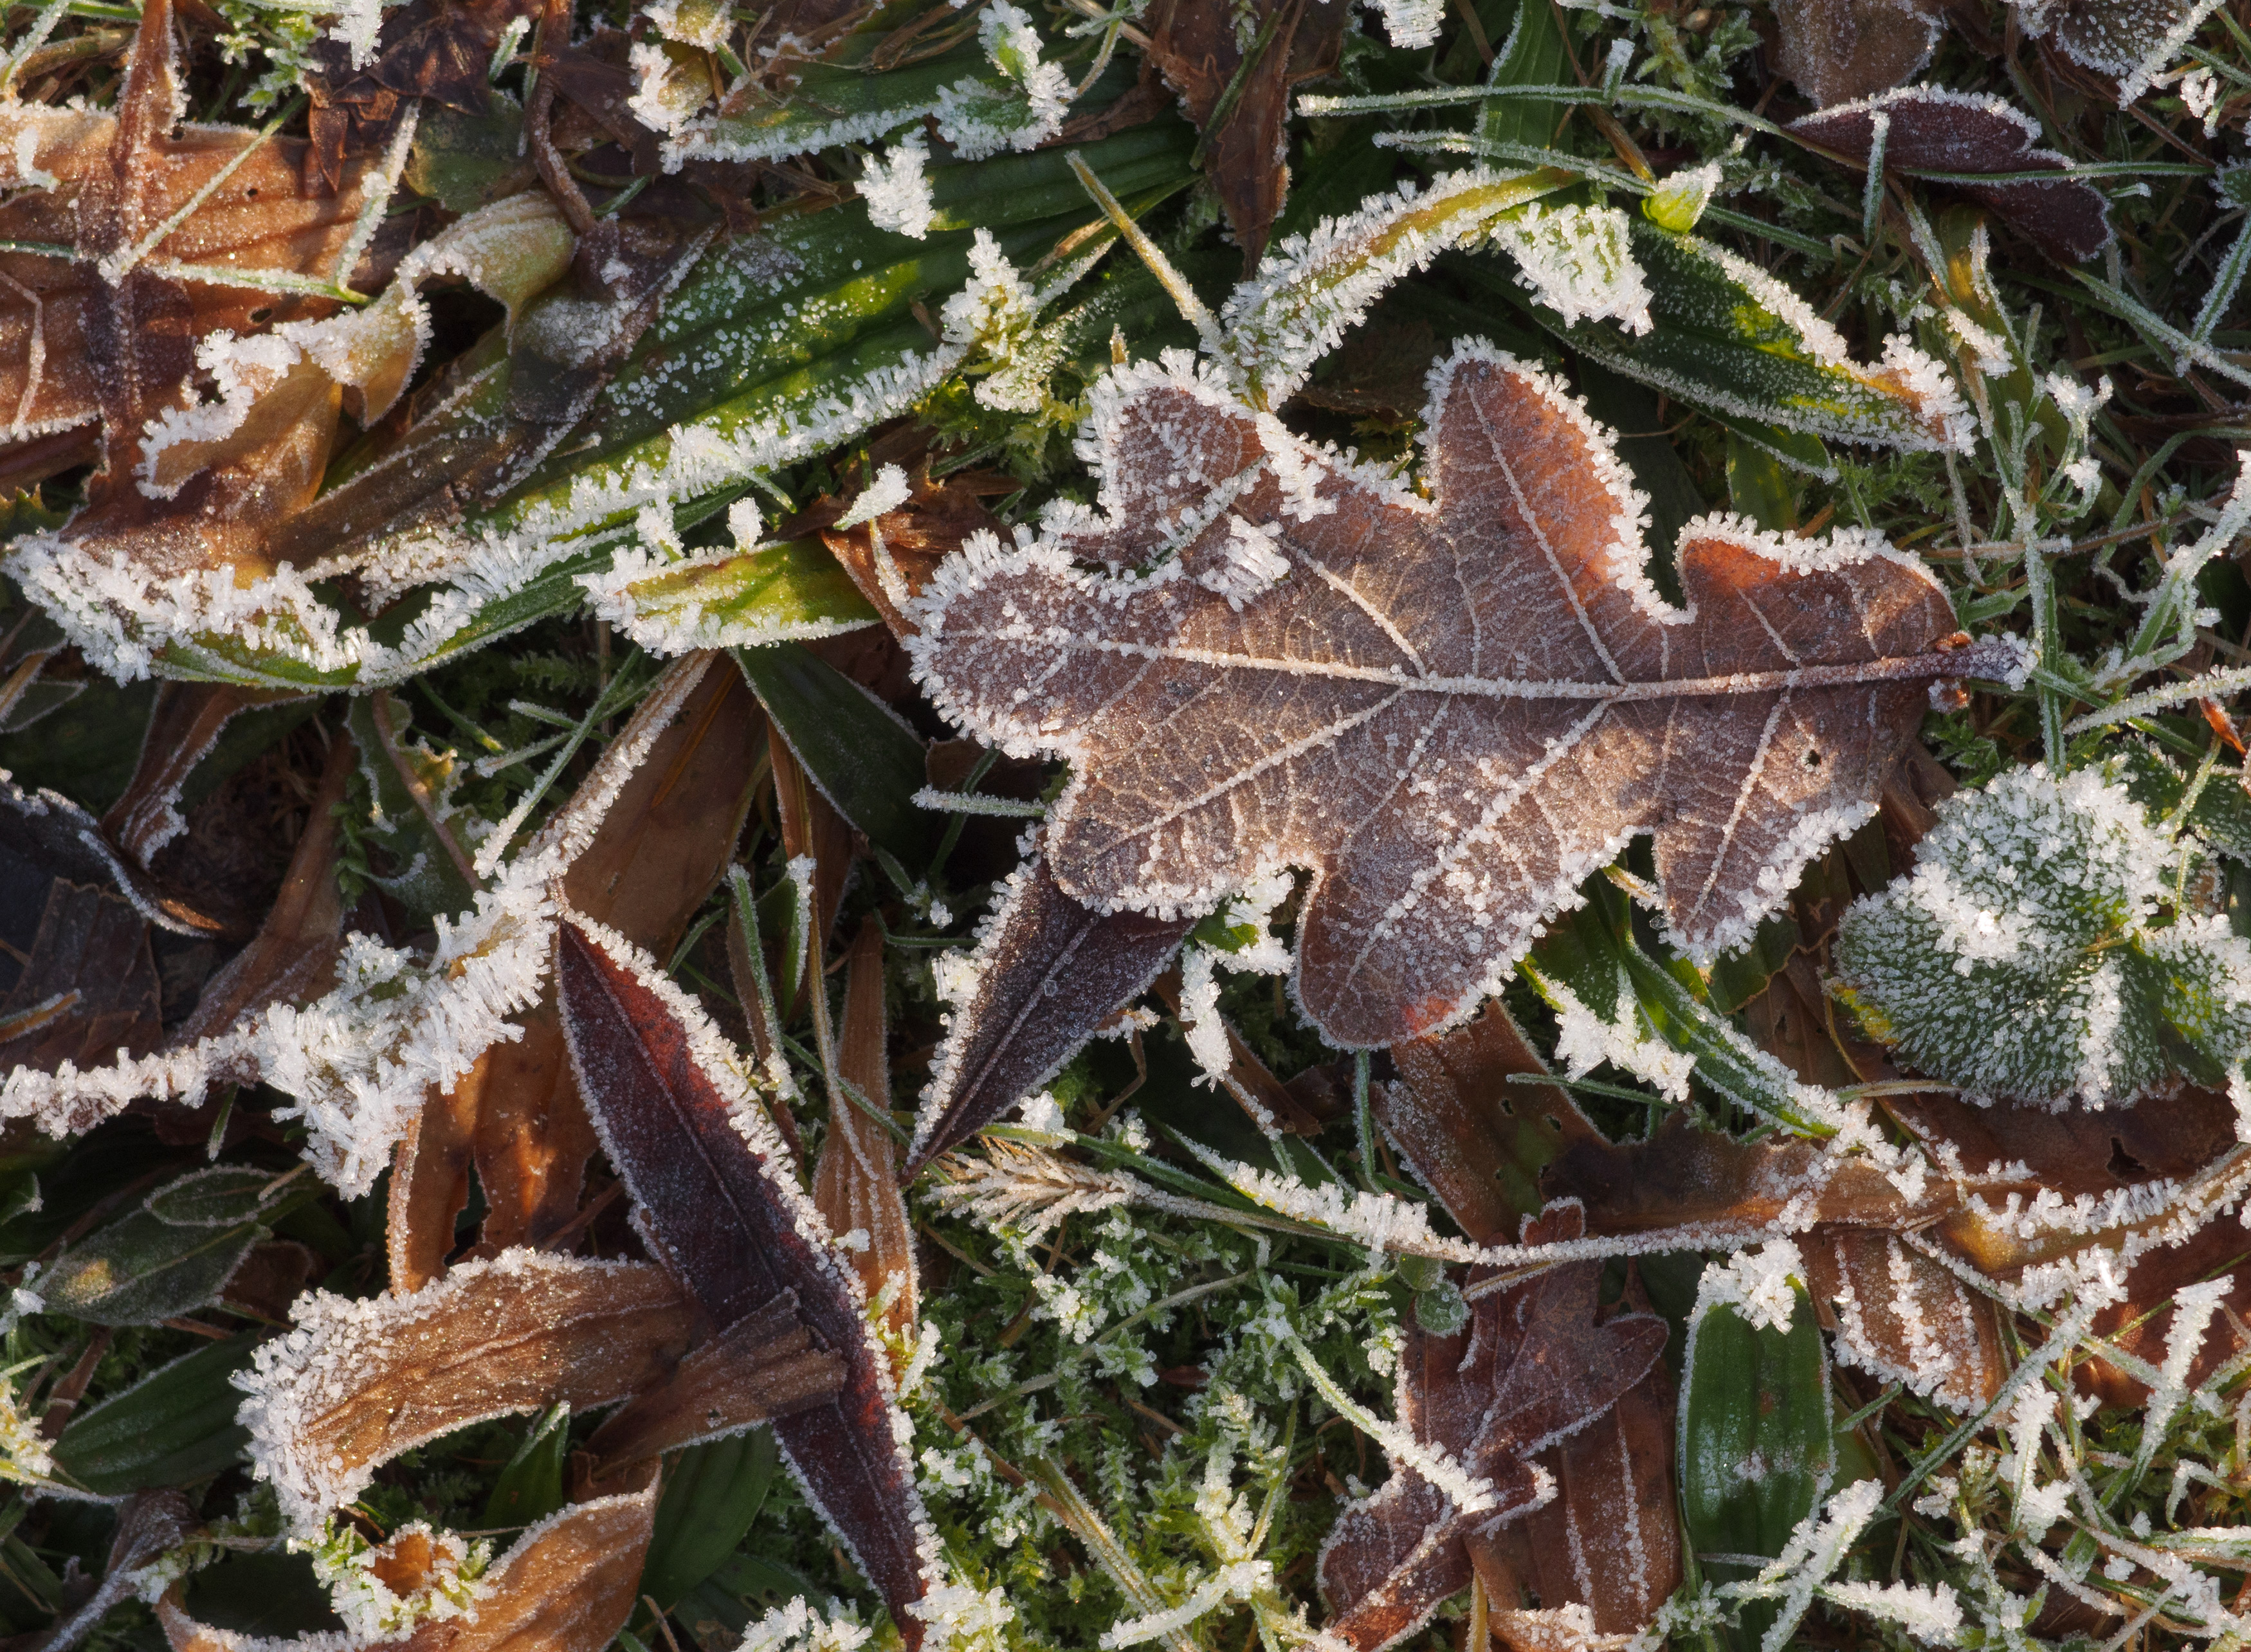 Free Image: Frozen Leaves And Grass | Libreshot Public Domain Photos